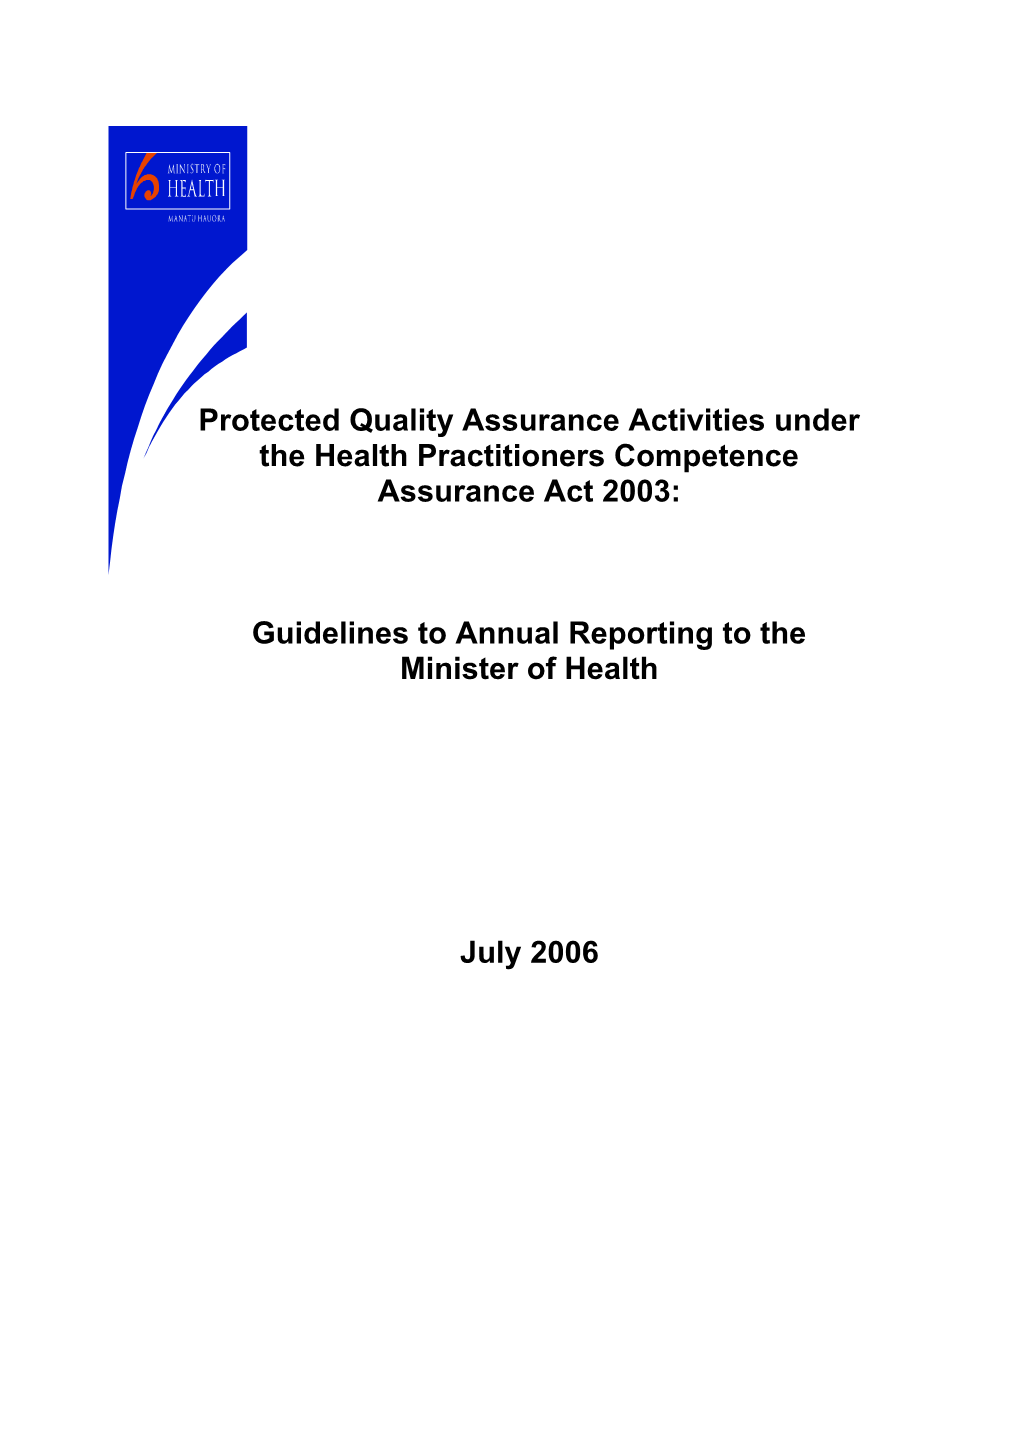 QAA Guidelines to Annual Reporting to the Minister of Health